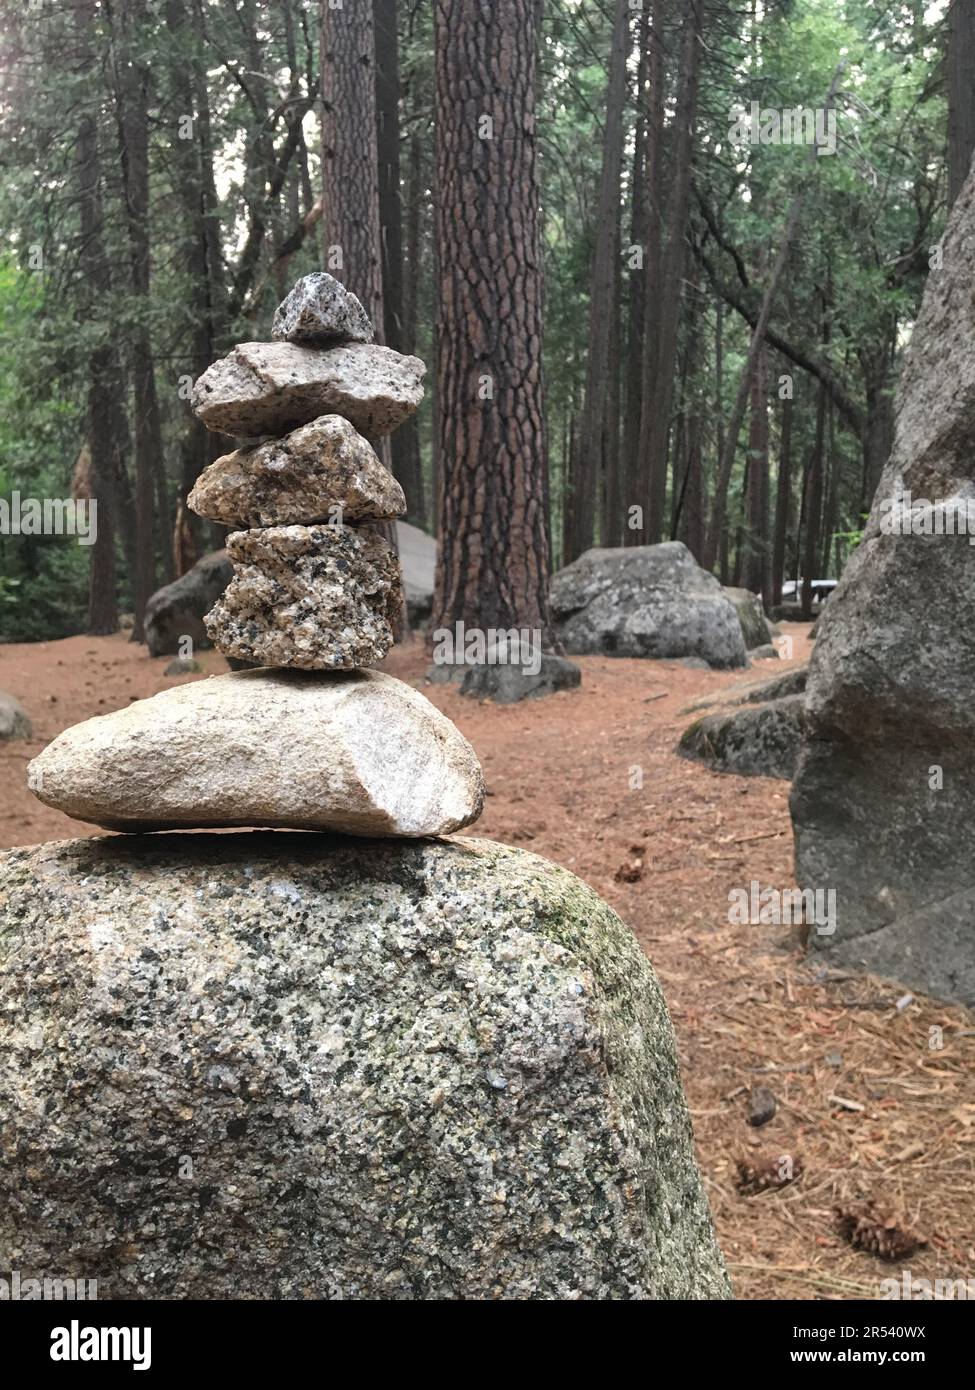 An upright pile of zen rocks creates a feeling of tranquility and inner peace in the forest of Yosemite National Park Stock Photo